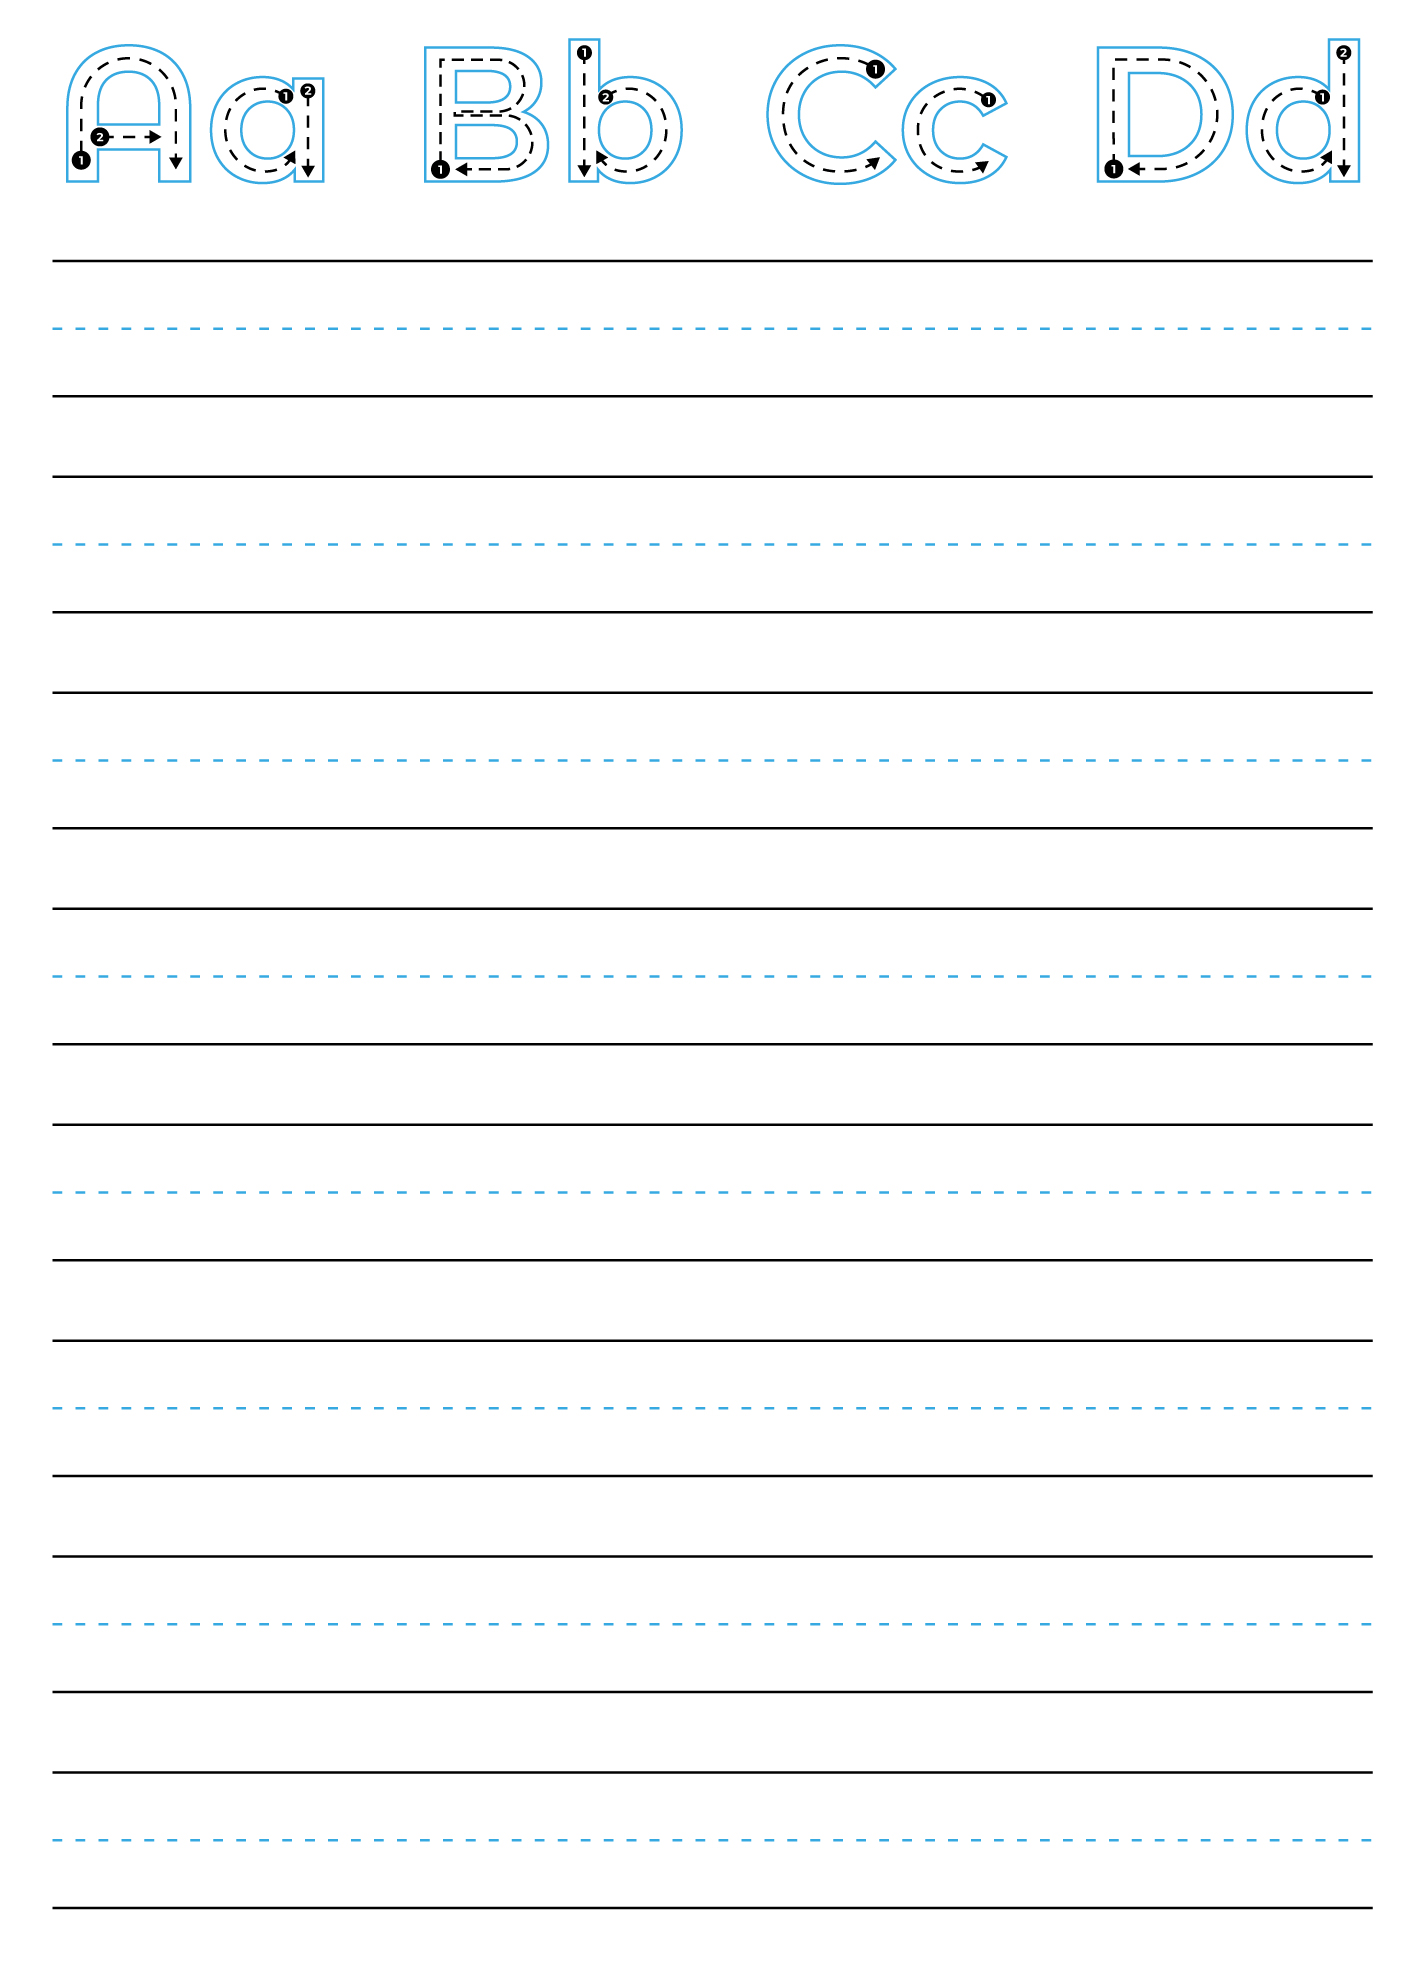 28+ Lined Paper Templates